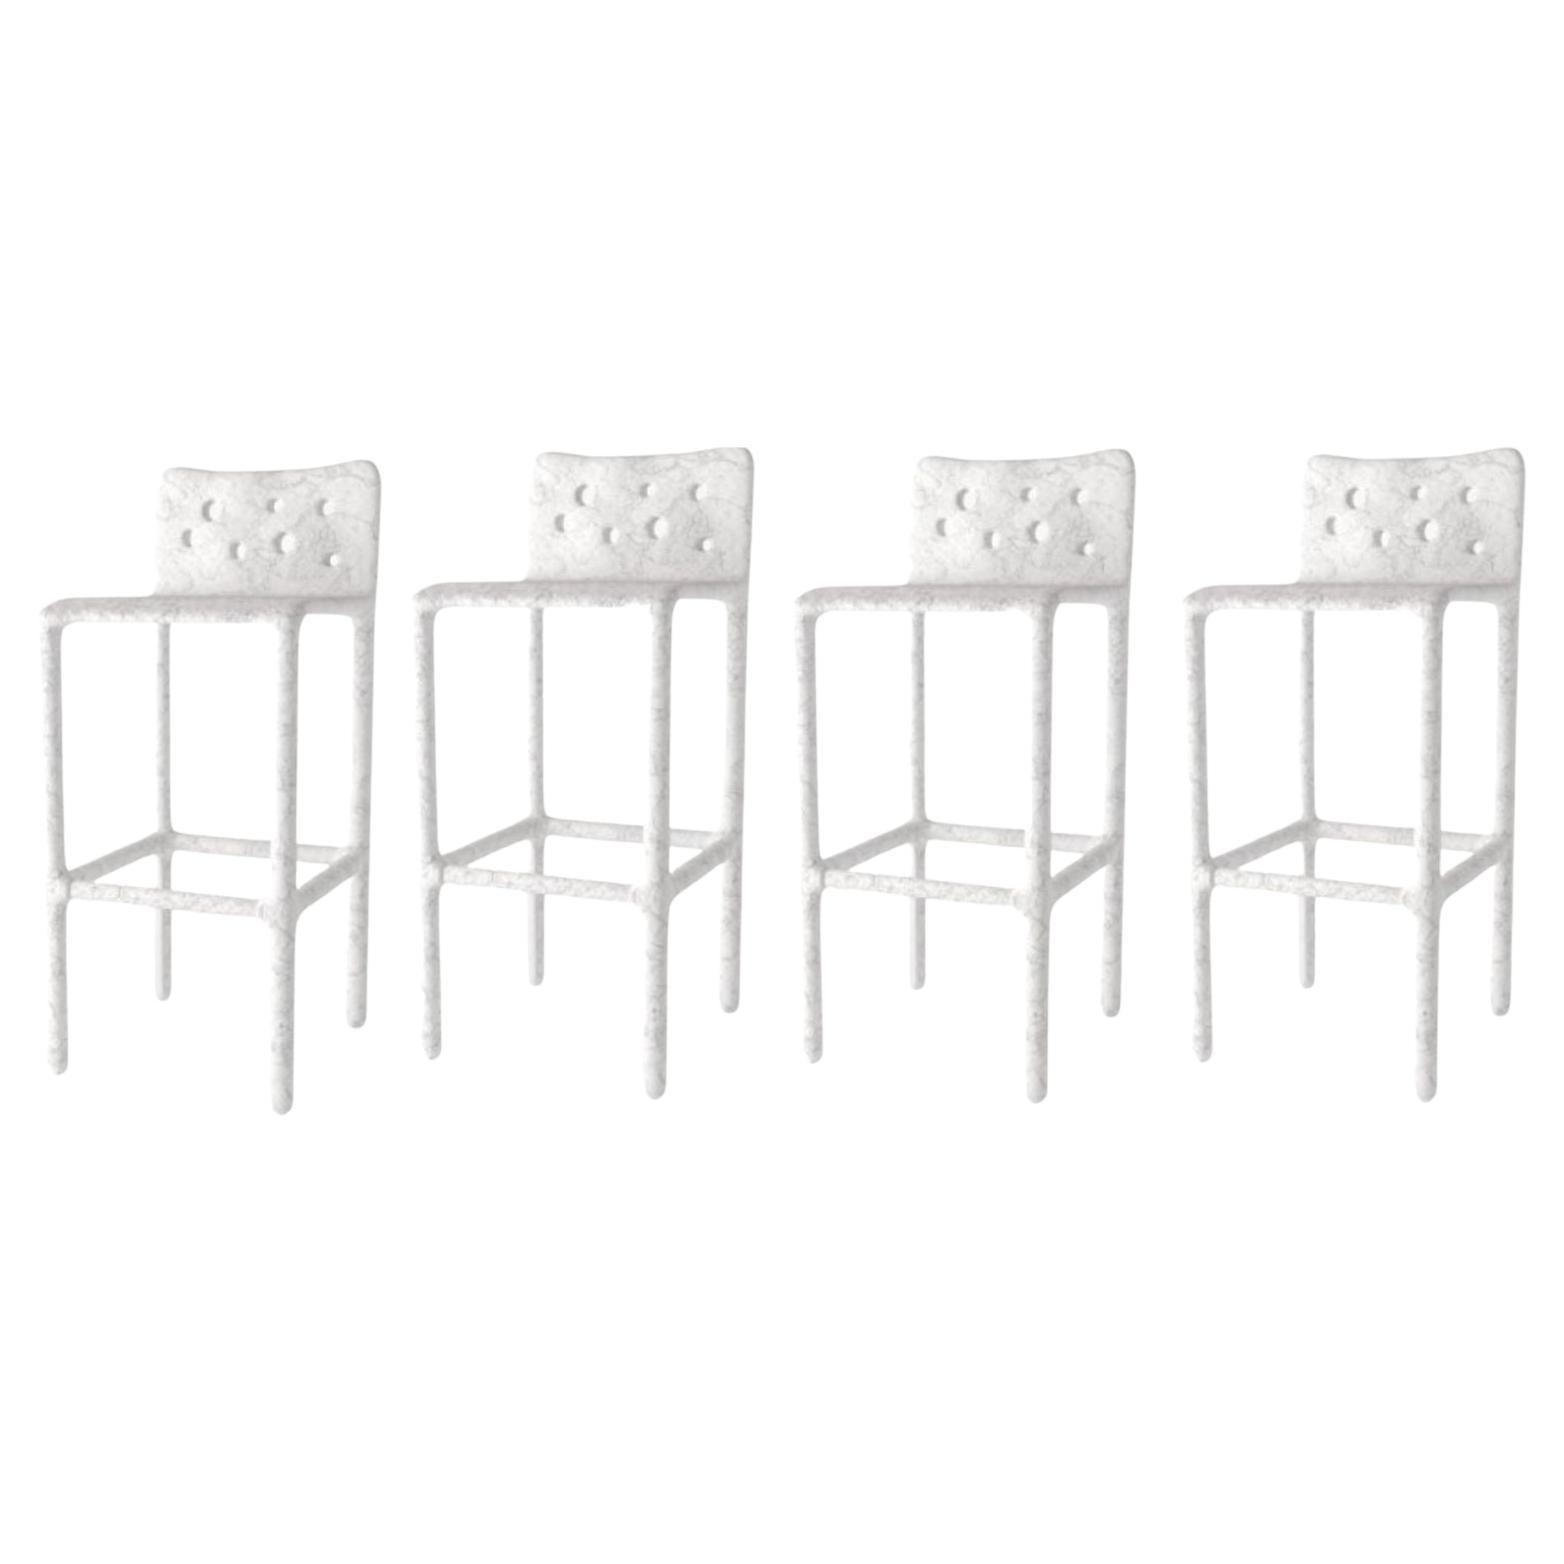 Set of 4 Outdoor White Sculpted Contemporary Chairs by Faina For Sale